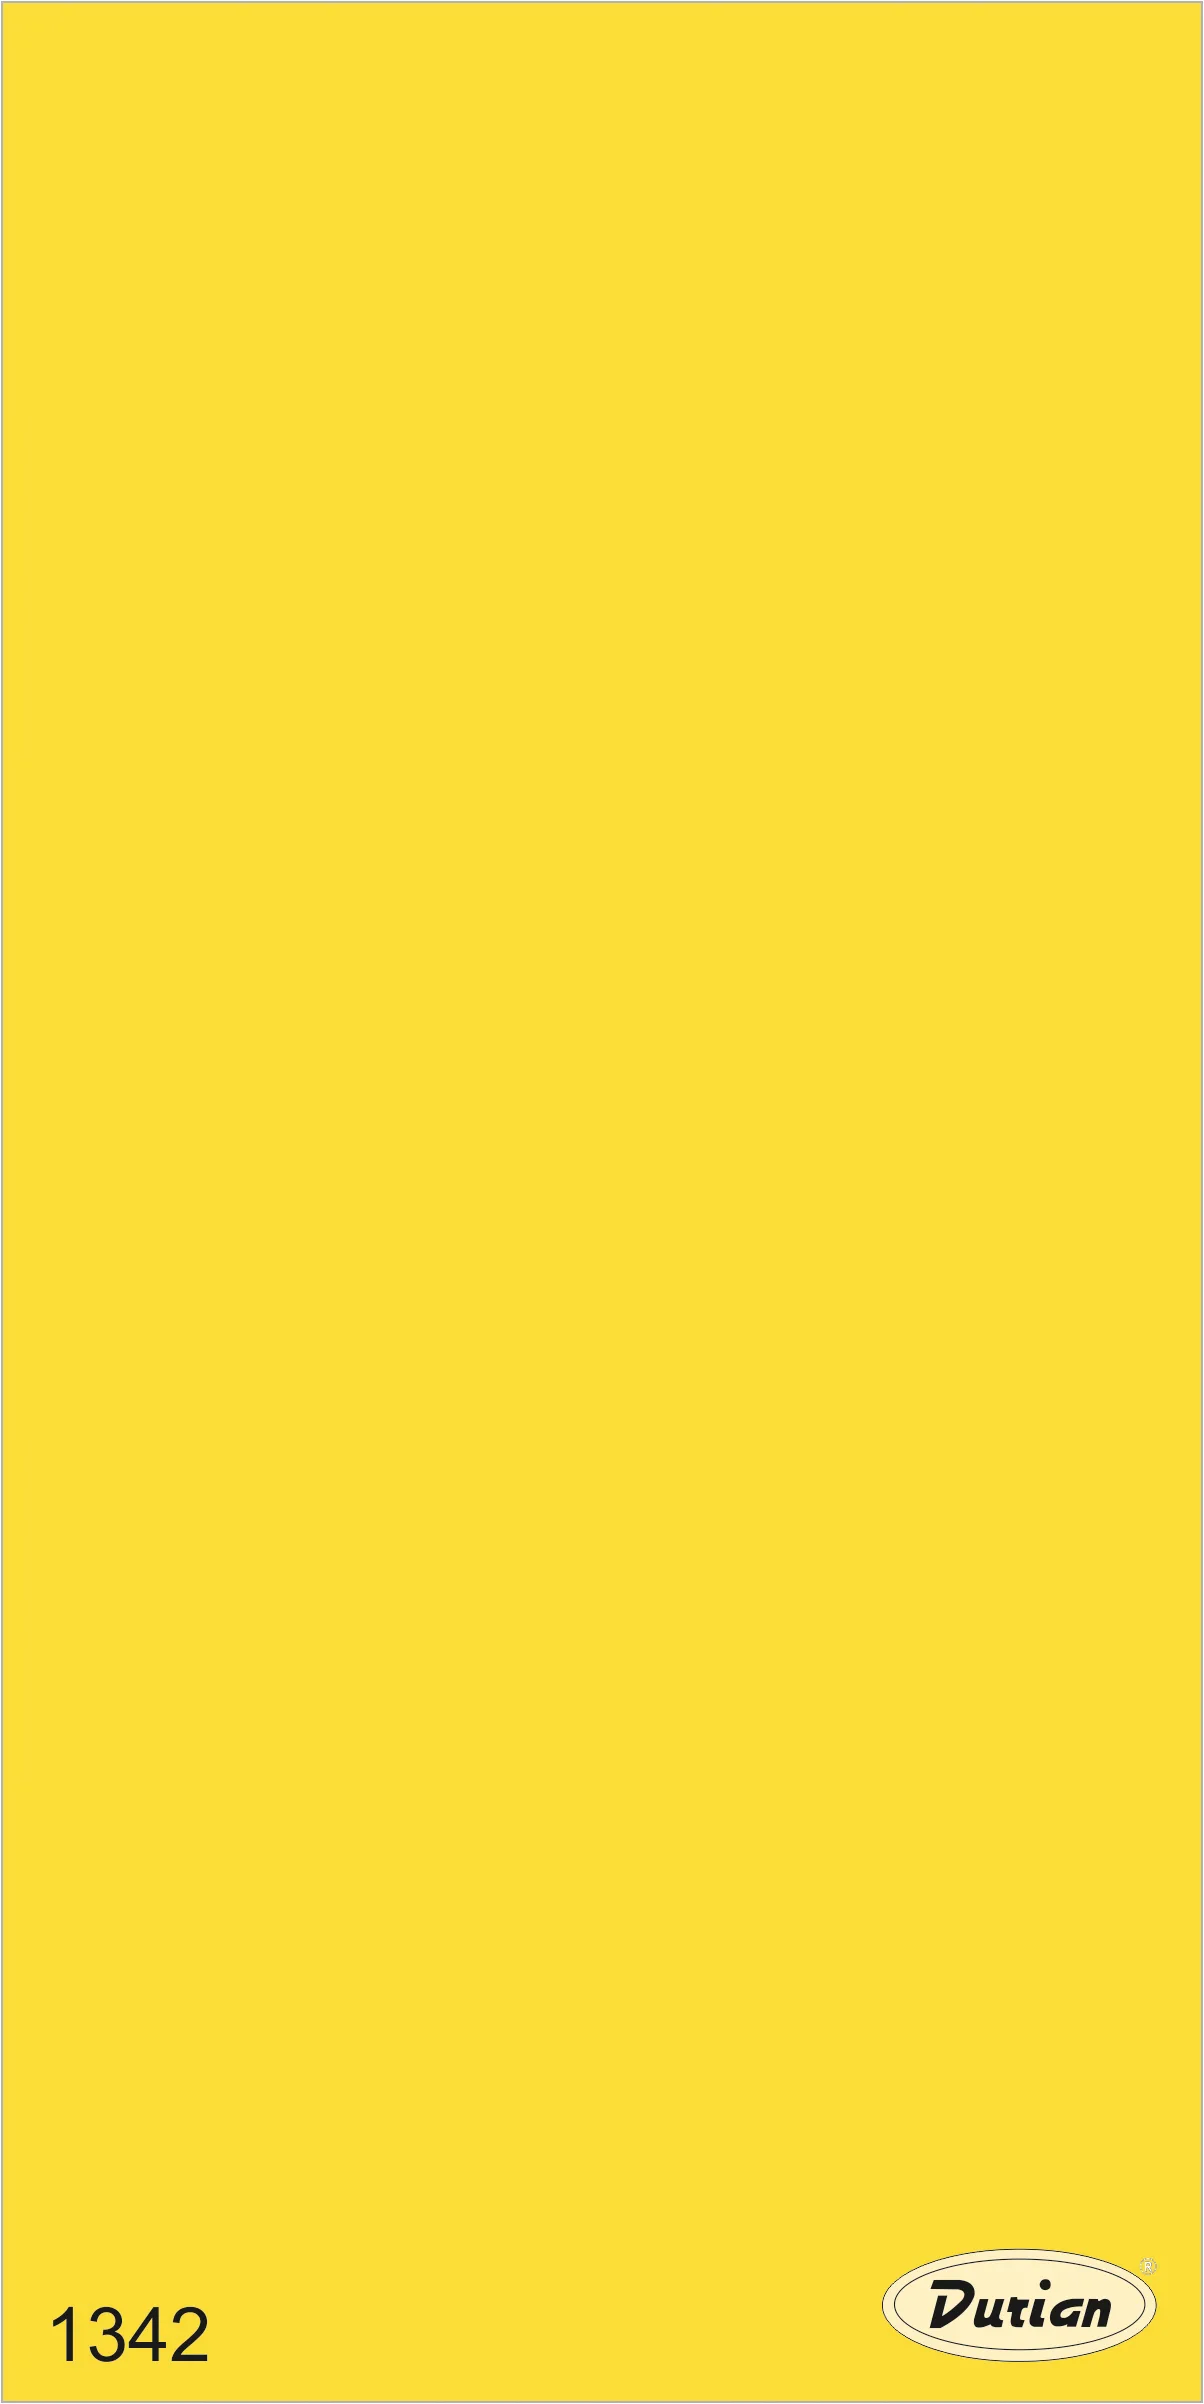 Durian 1342 HS+ – BRIGHT YELLOW